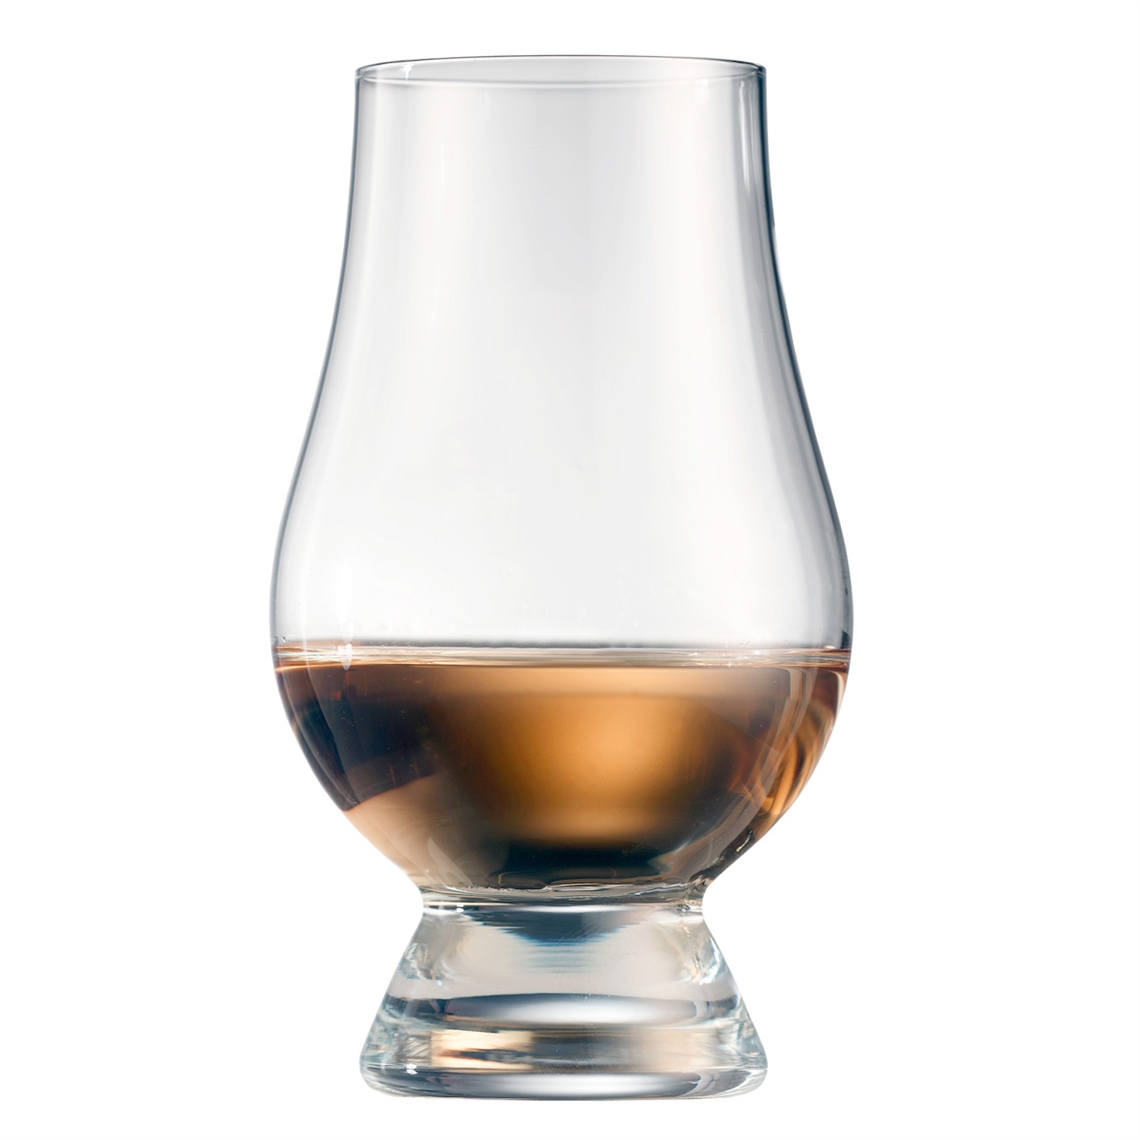 View more long drink & tumblers from our Whisky Glasses range